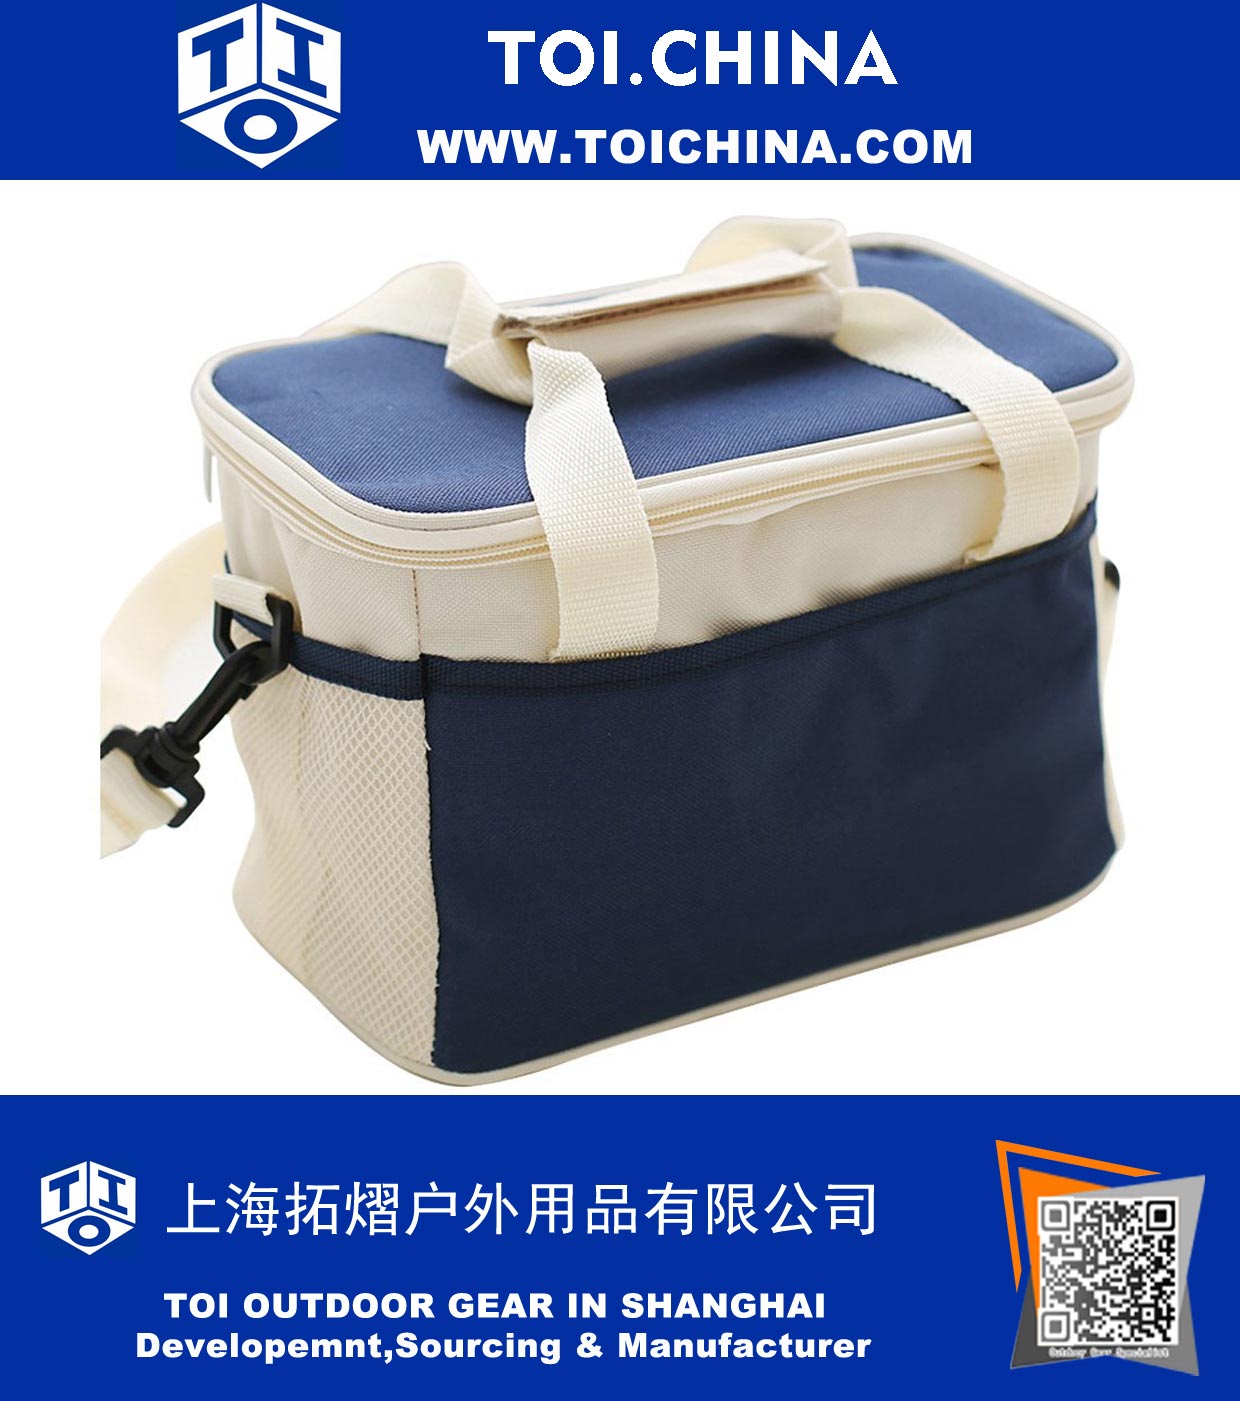 Waterproof Insulated Lunch Bag Cooler Lunch Tote Boxes